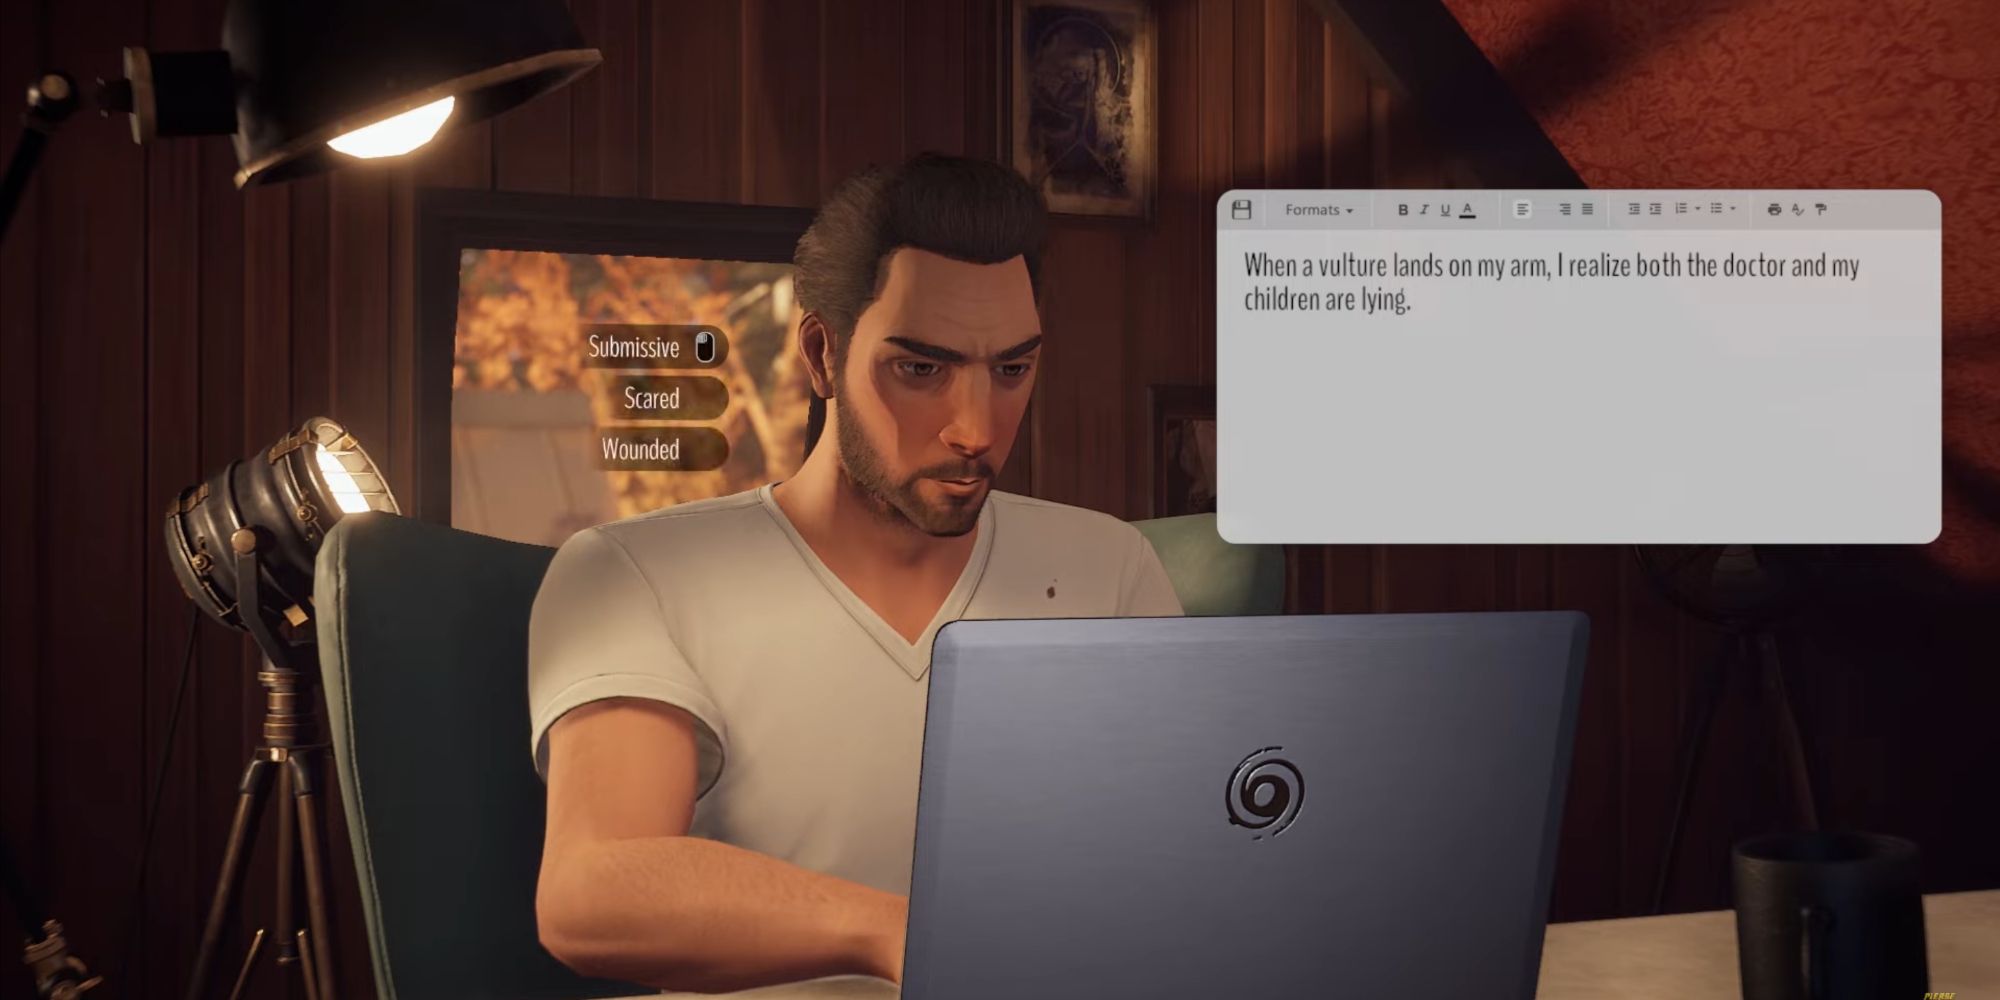 The main protagonist Ed typing a sentence on his document, with a prompt asking you to choose the next sentence.